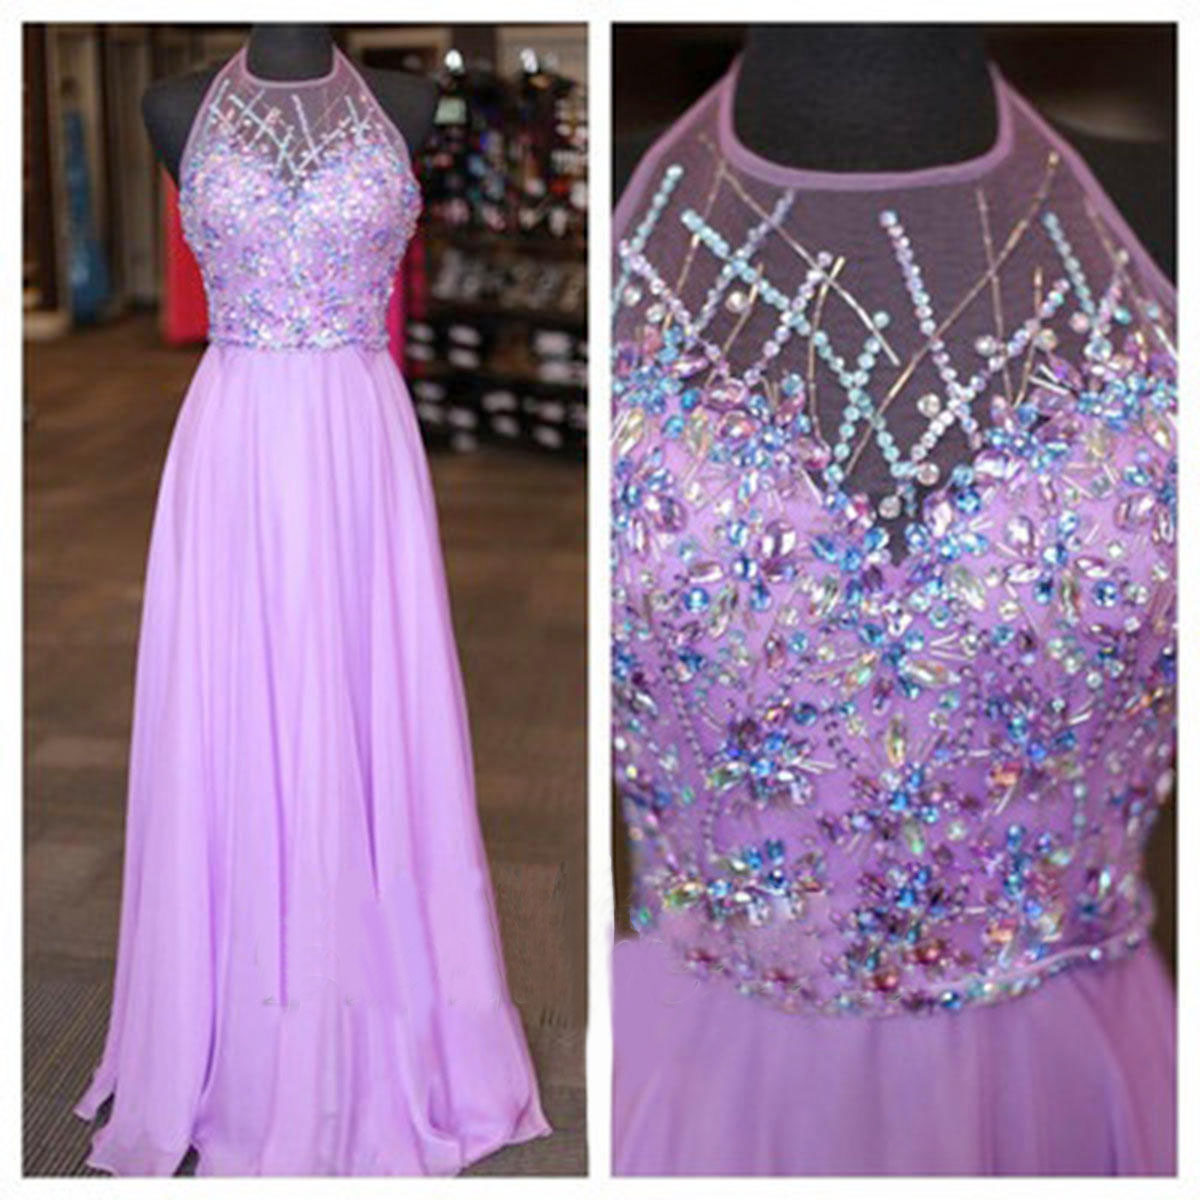 Lilac Prom Dresses, Beaded Prom Dress, Sexy Prom Dresses, Prom Dresses, 2016 Prom Dresses, Sexy Prom Dresses, Dresses For Prom